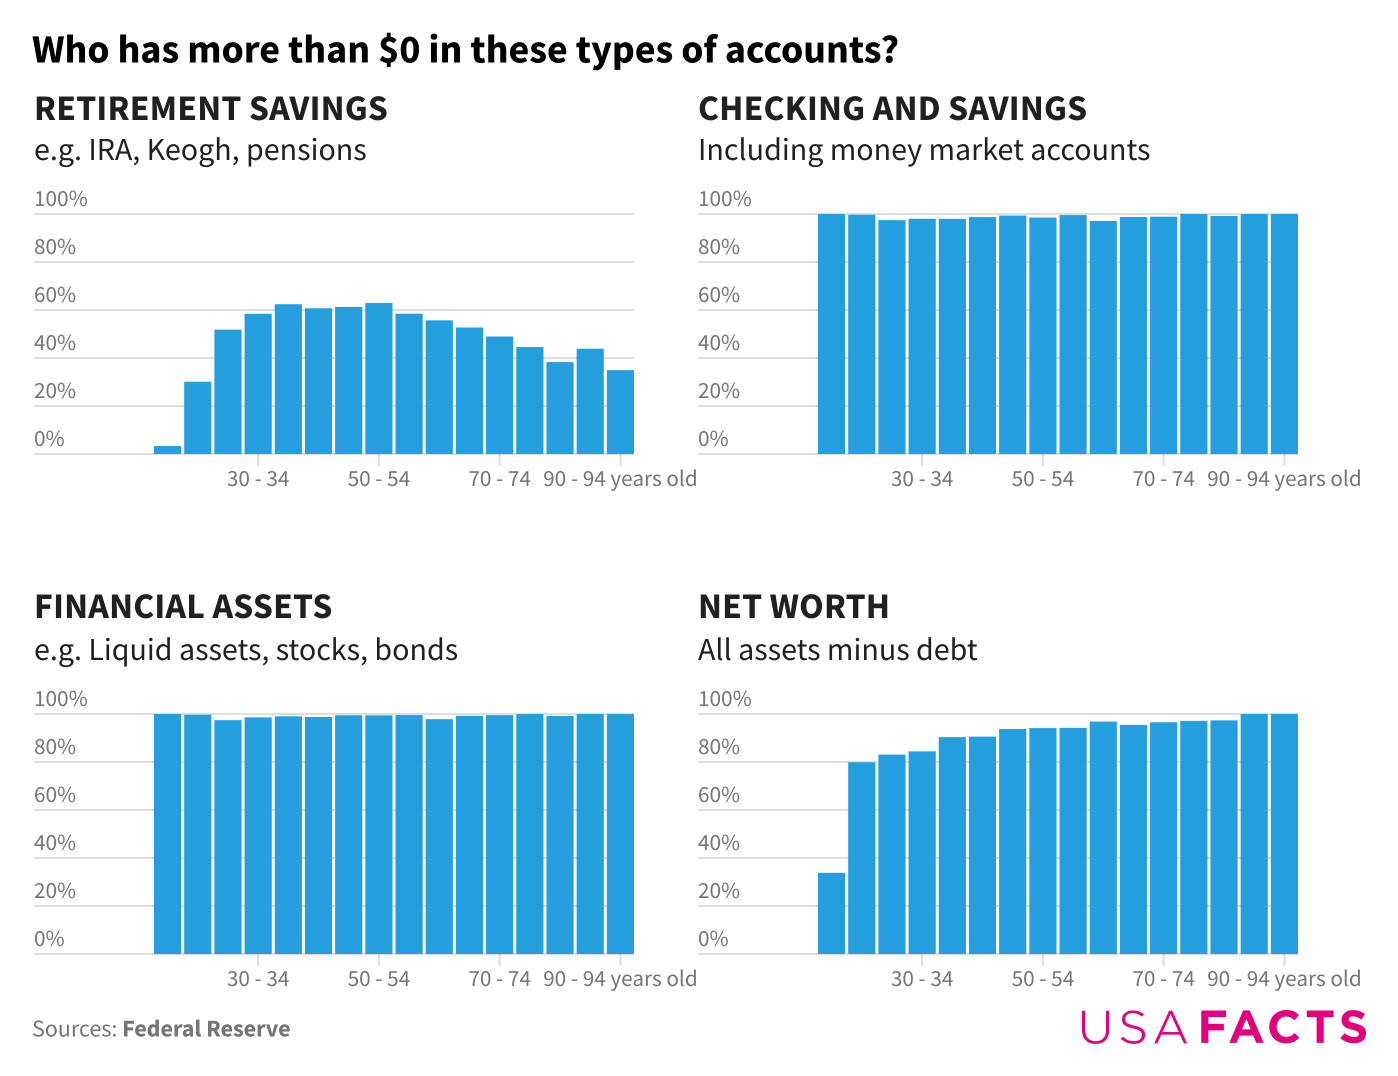 Four bar charts showing what percentage of people within different age brackets had saved any money in Retirement Savings accounts, Checking and Savings accounts, Financial assets, and their net worth. The majority of people in all age groups had saved something in Checking and Savings and Financial Assets. The least common at all age groups was Retirement Savings accounts.